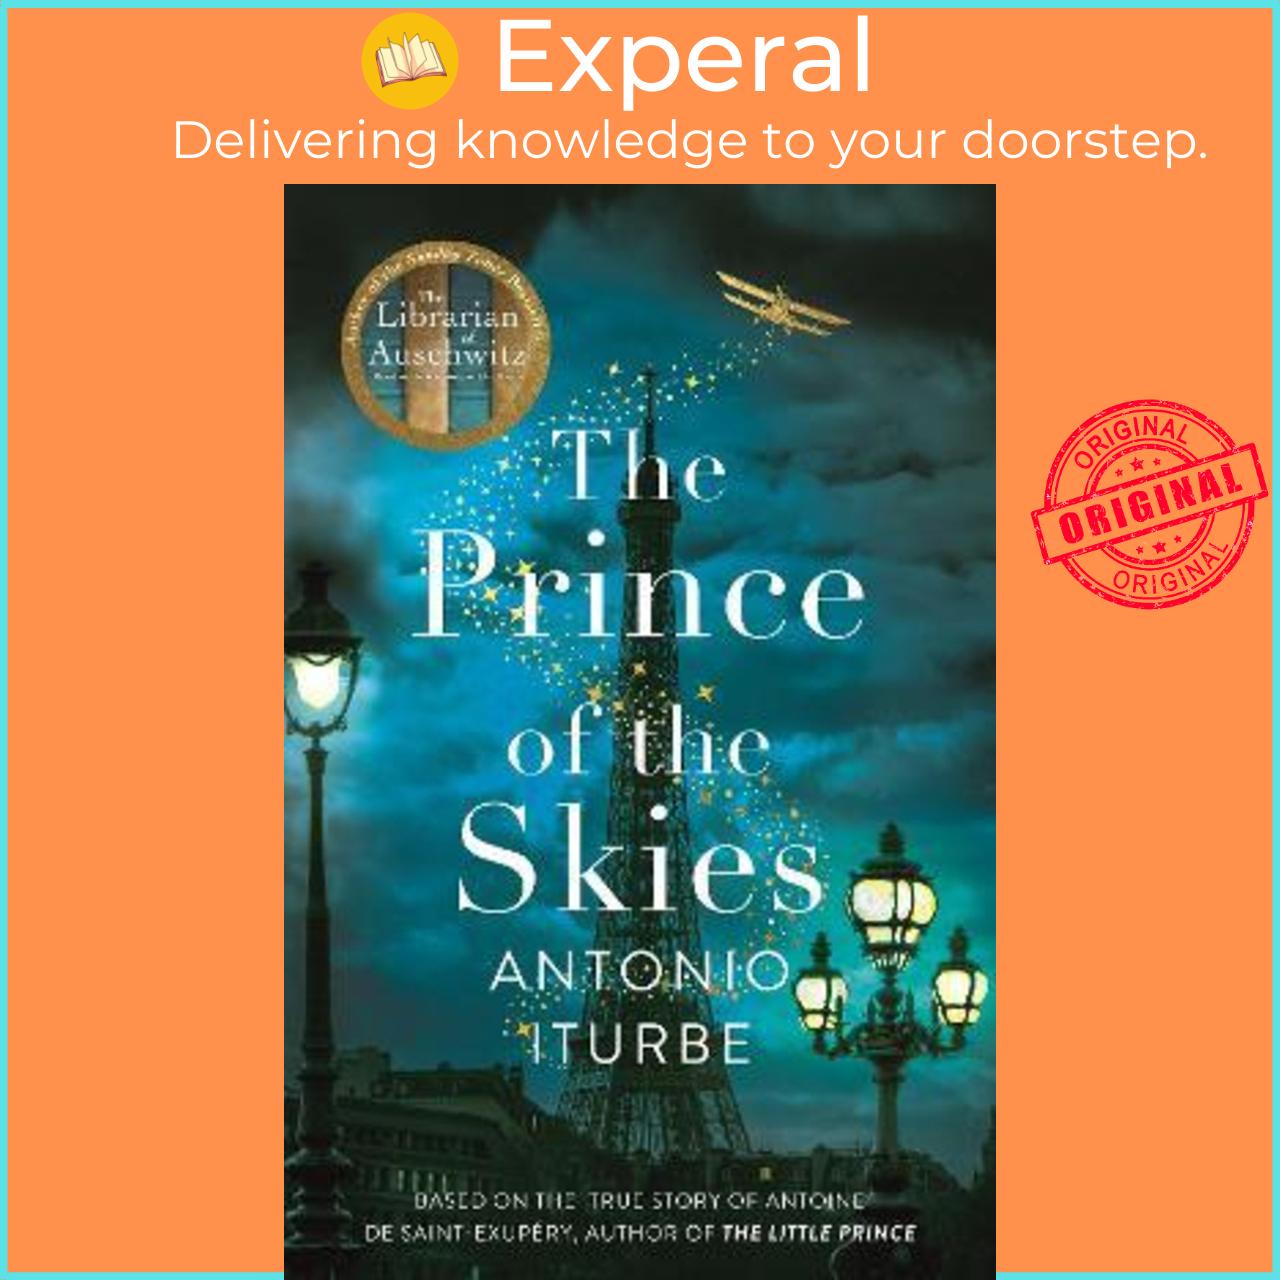 Sách - The Prince of the Skies by Antonio Iturbe Lilit Zekulin Thwaites (UK edition, paperback)